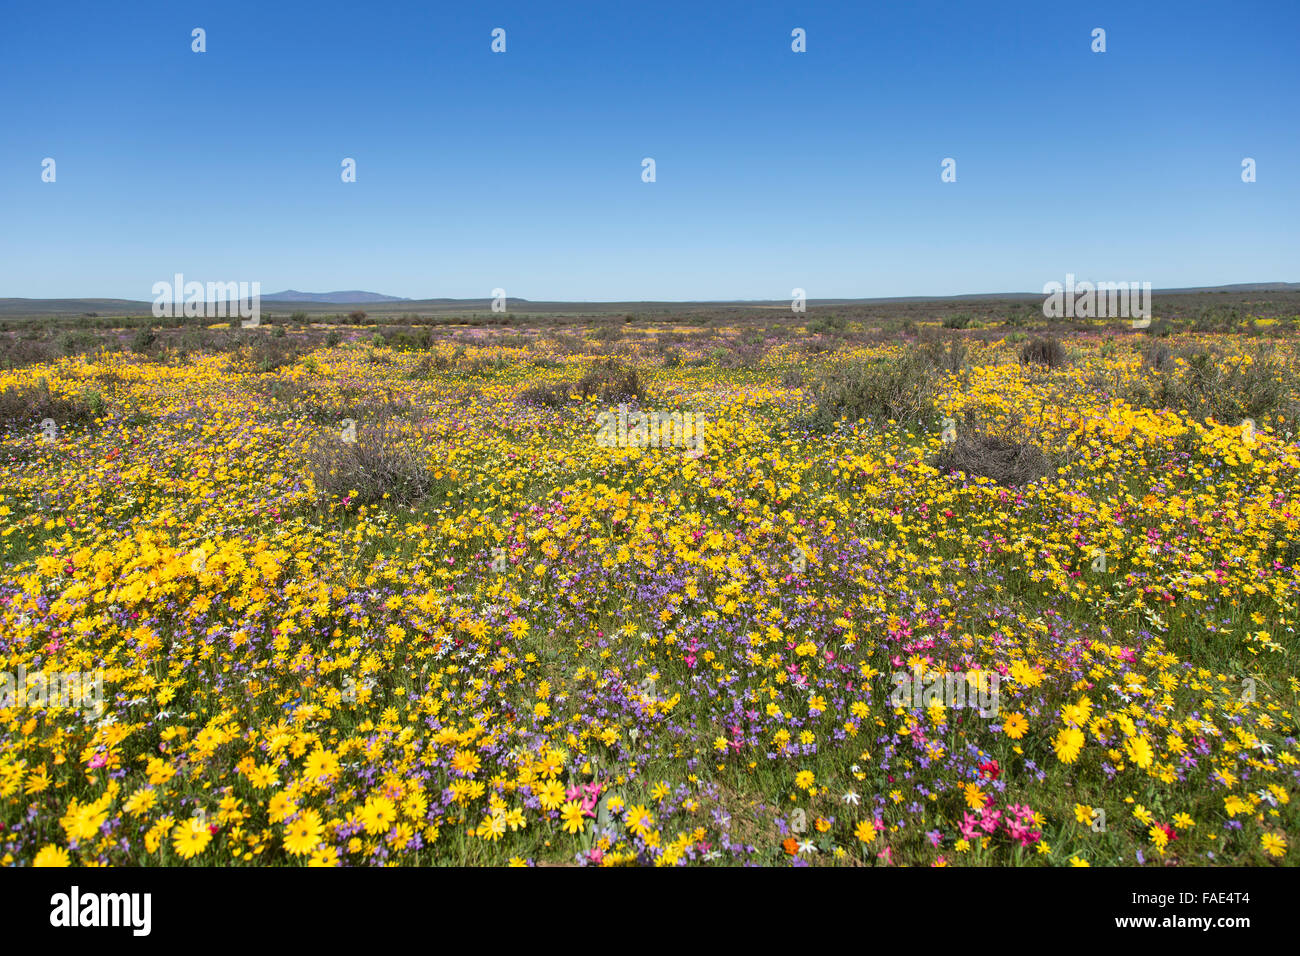 Spring wildflowers, Papkuilsfontein farm, Nieuwoudtville, Northern Cape, South Africa Stock Photo